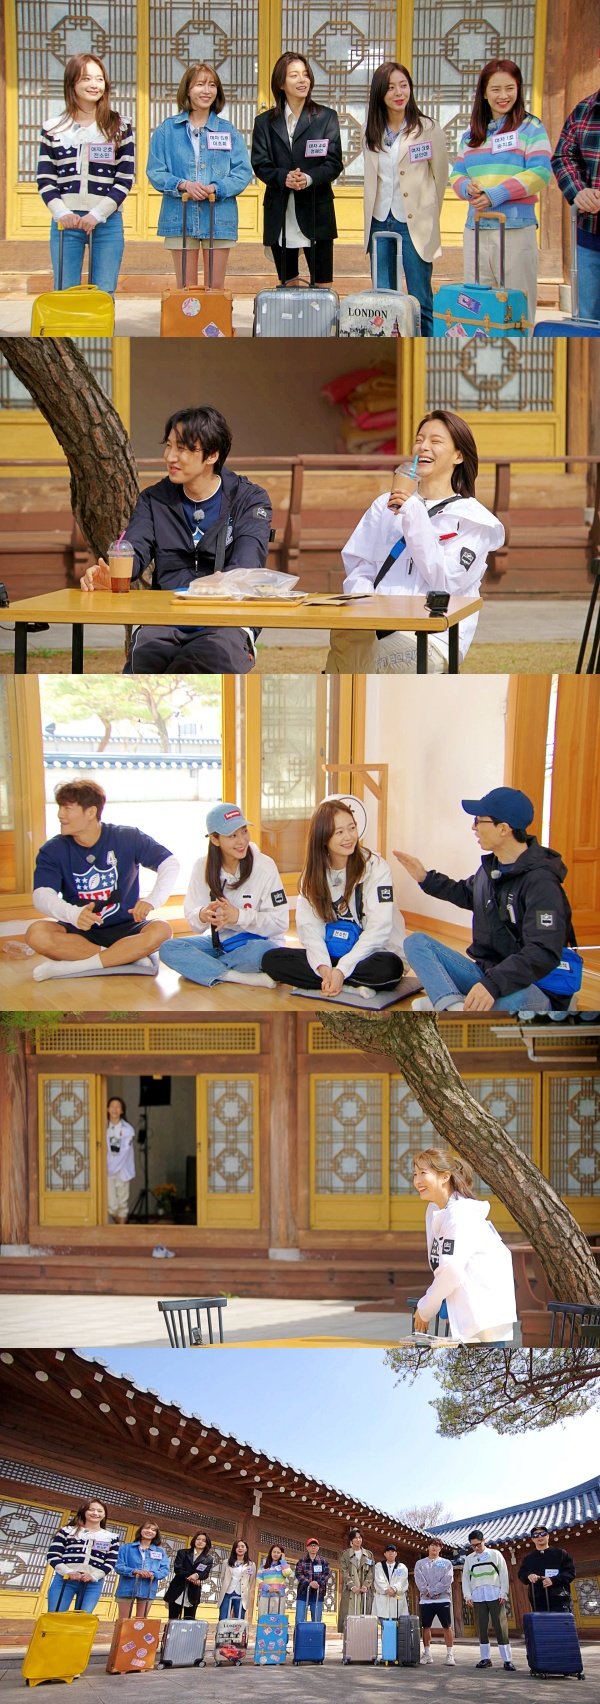 On SBS Running Man, Kung-muk Signal Entertainment Village Race will be released to find a fantasy entertainment partner.In a recent recording, the members appeared to be men and women members who entered the entertainment village to find an entertainment partner.Here, actor Lee Cho-hee X Seol In-ah X Jeong He-In was a female member and energized the entertainment village.On this day, it was Concepts, which is the first floor of the power, so each of them transformed into a new subcar and appealed to various jobs.Yoo Jae-Suk is an IT industry worker, and Yang Se-chan appeals with his financial power, saying, I have suddenly become rich recently. Lee Kwang-soo has released his usual image and job.Song Ji-hyo had a mystic strategy, saying, The present is a dream, and the job is secret. Lee Cho-hee transformed into a rich man who runs real estate, and Seol In-ah showed an activeness to target only one member as a tanning shop president.Jeong He-In, who received attention as a resemblance to Hwang Shin-hye, unveiled the anti-war job and emanated its charm.On the other hand, on this day, I interviewed the inside and added fun to the entertainment village.A female member laughed at the heart of a man who said, The coronation is insidious and it is burdensome.In the fierce nervous battle to find an entertainment partner, there are members who are continuously rejected despite active appeal, and members who have become so popular that they can not cope with suddenly heart beats and confused. The results of the unpredictable entertainment bang match are revealed at Running Man, which is broadcasted at 5 pm on Sunday, 18th.